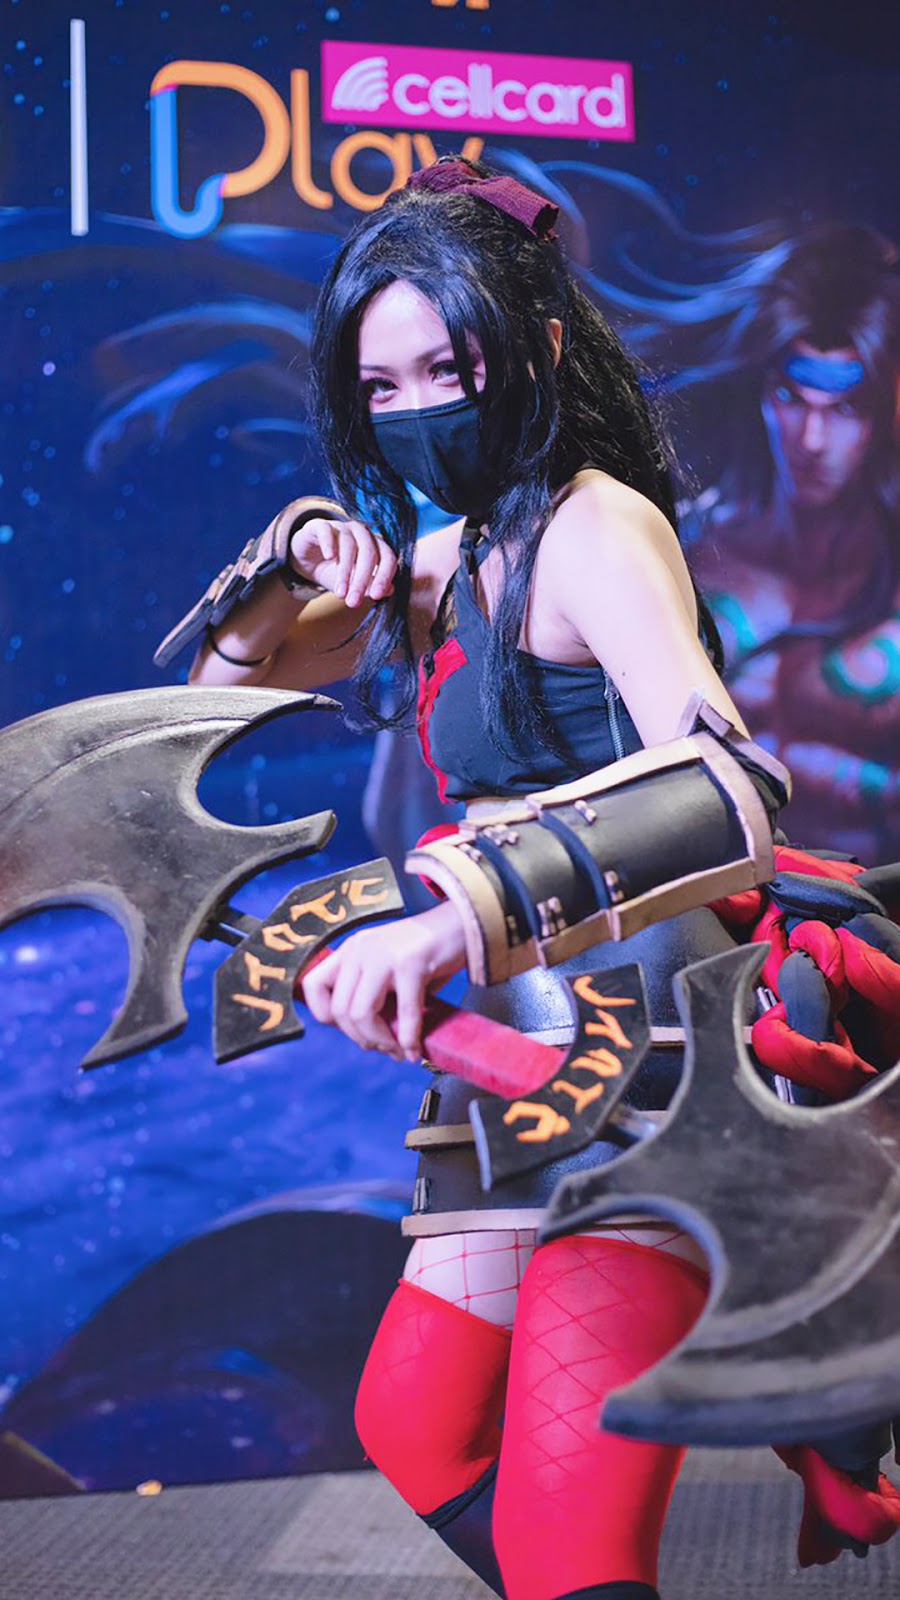  Wallpaper  Android Full HD  Cosplay  Hero Mobile  Legend  